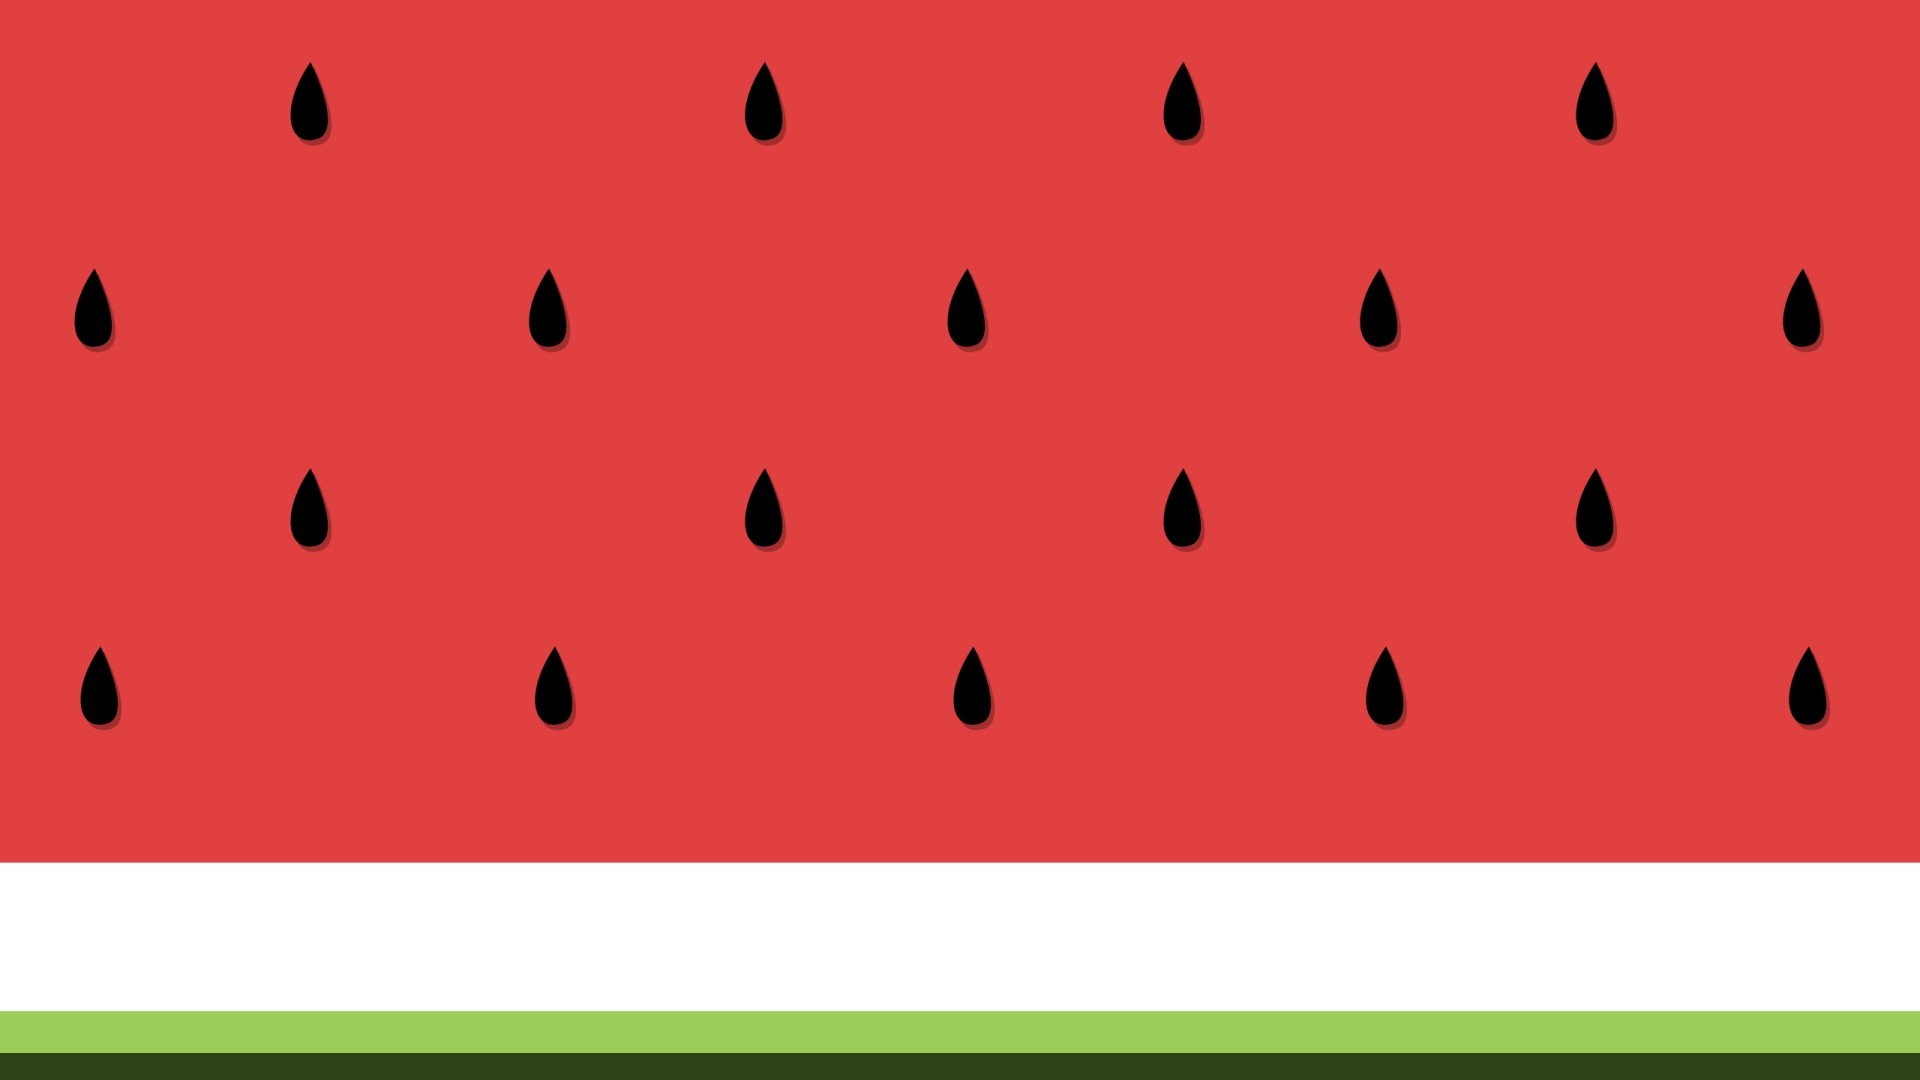 minimalism, Abstract, Digital Art, Watermelons, Lines, Red, White, Green, Imagination Wallpaper